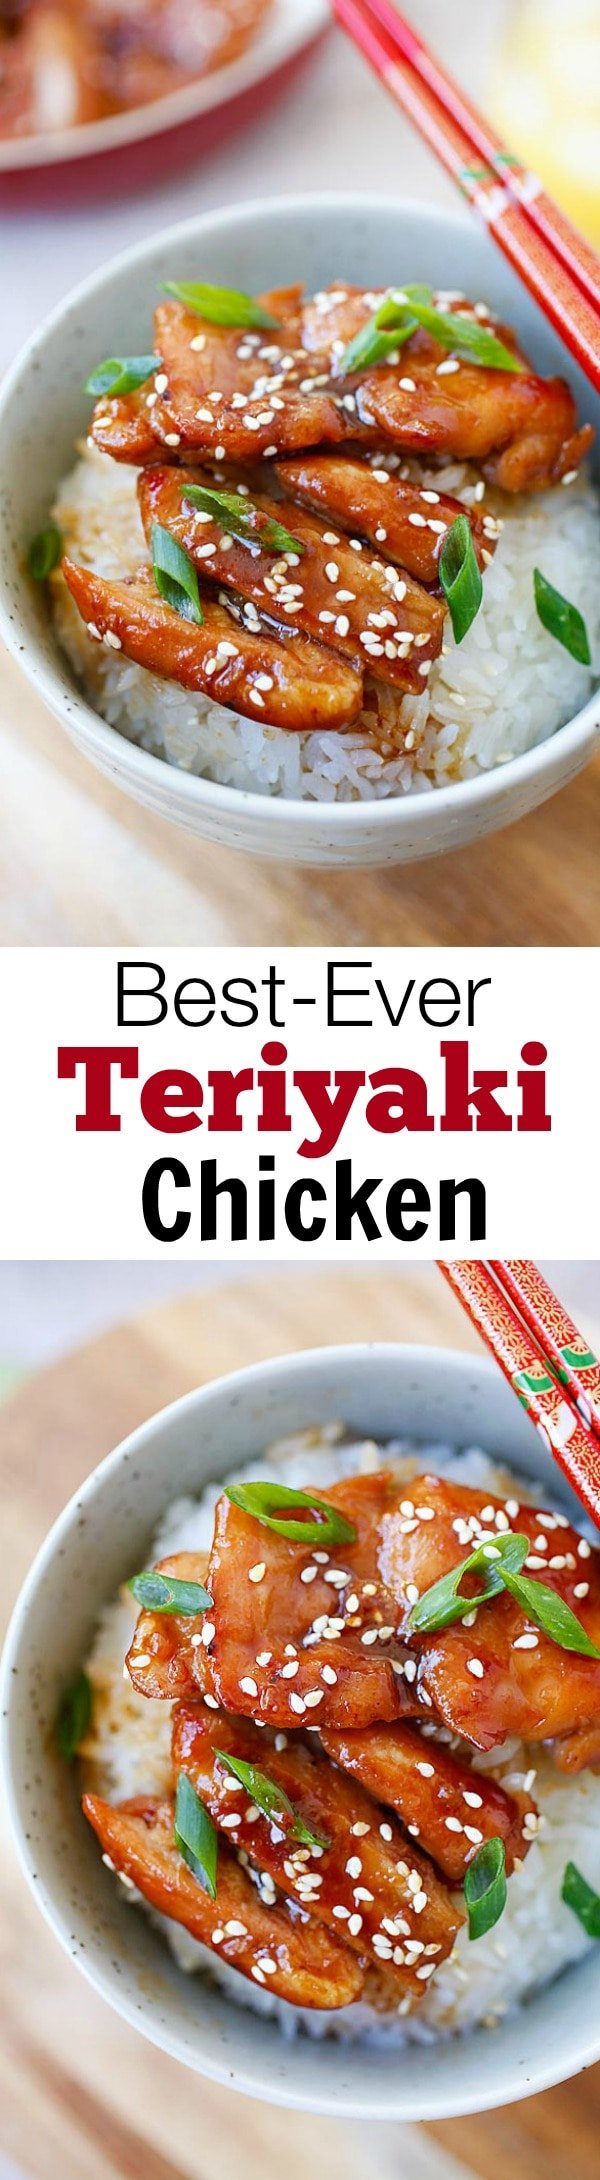 Easy Teriyaki Chicken  - the most popular Japanese chicken dish. Learn how to make the best-ever chicken teriyaki with only four ingredients, plus step-by-step cooking video | rasamalaysia.com